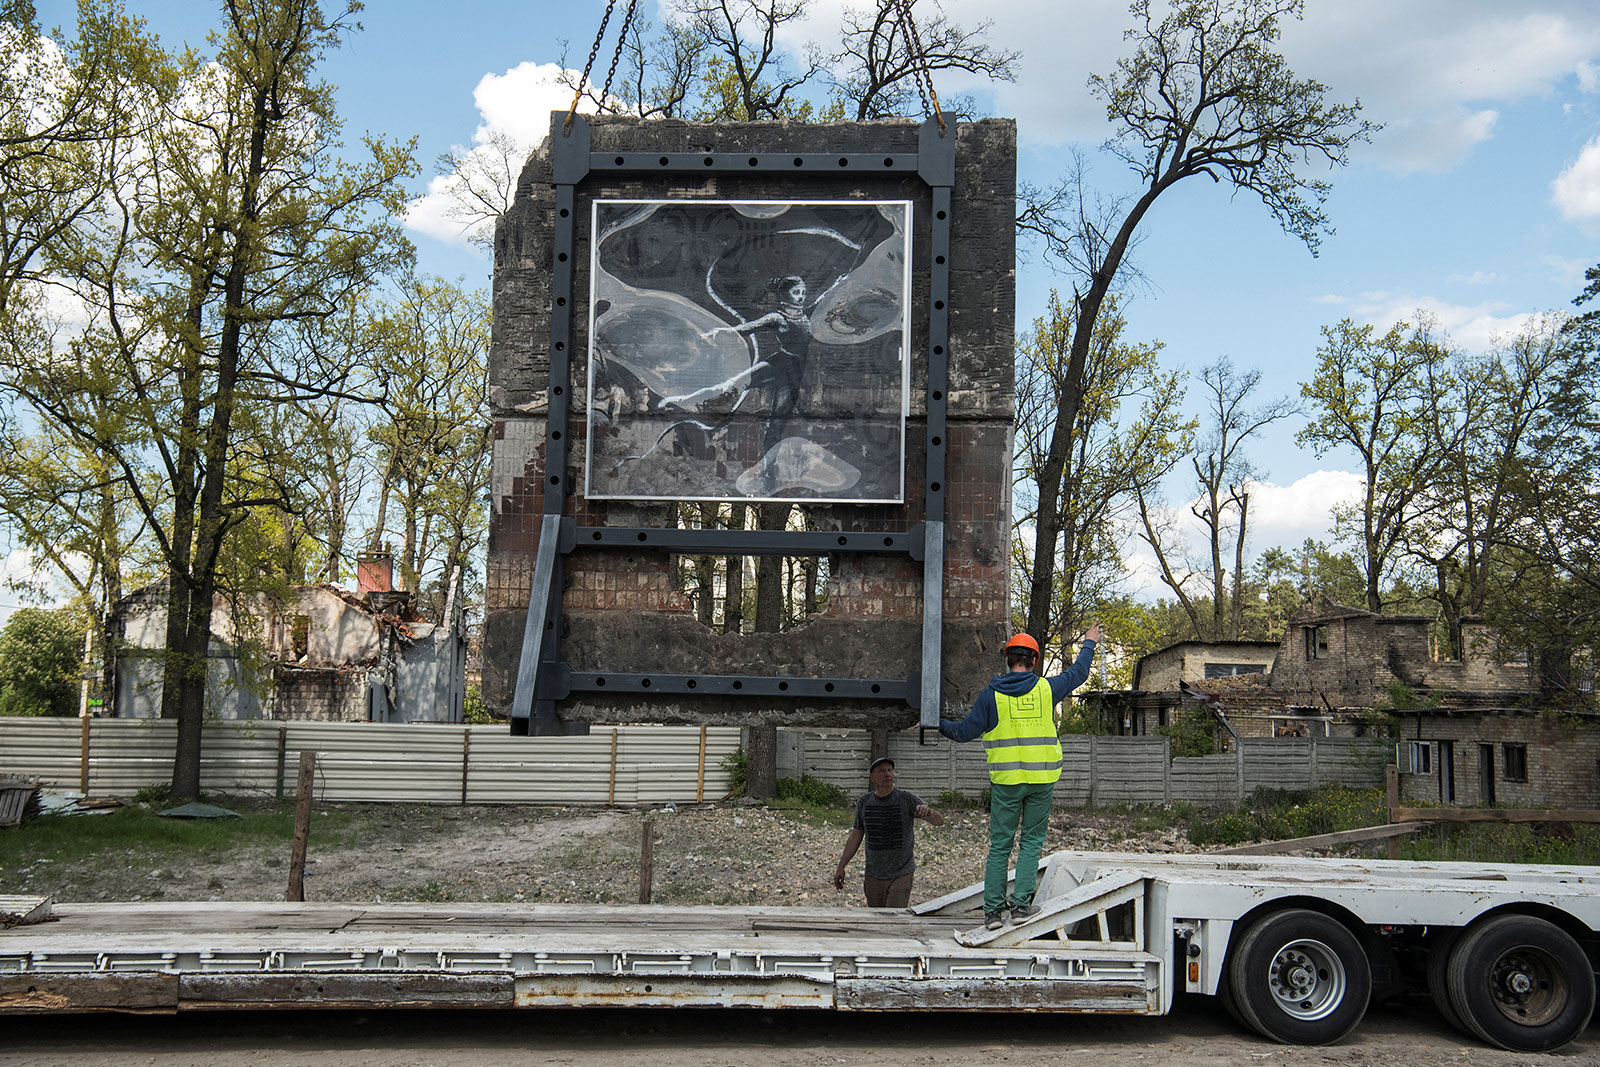 Workers unload the portion of a wall featuring the artwork after it was  dismounted from the heavily damaged residential in Irpin, Ukraine on May 13.